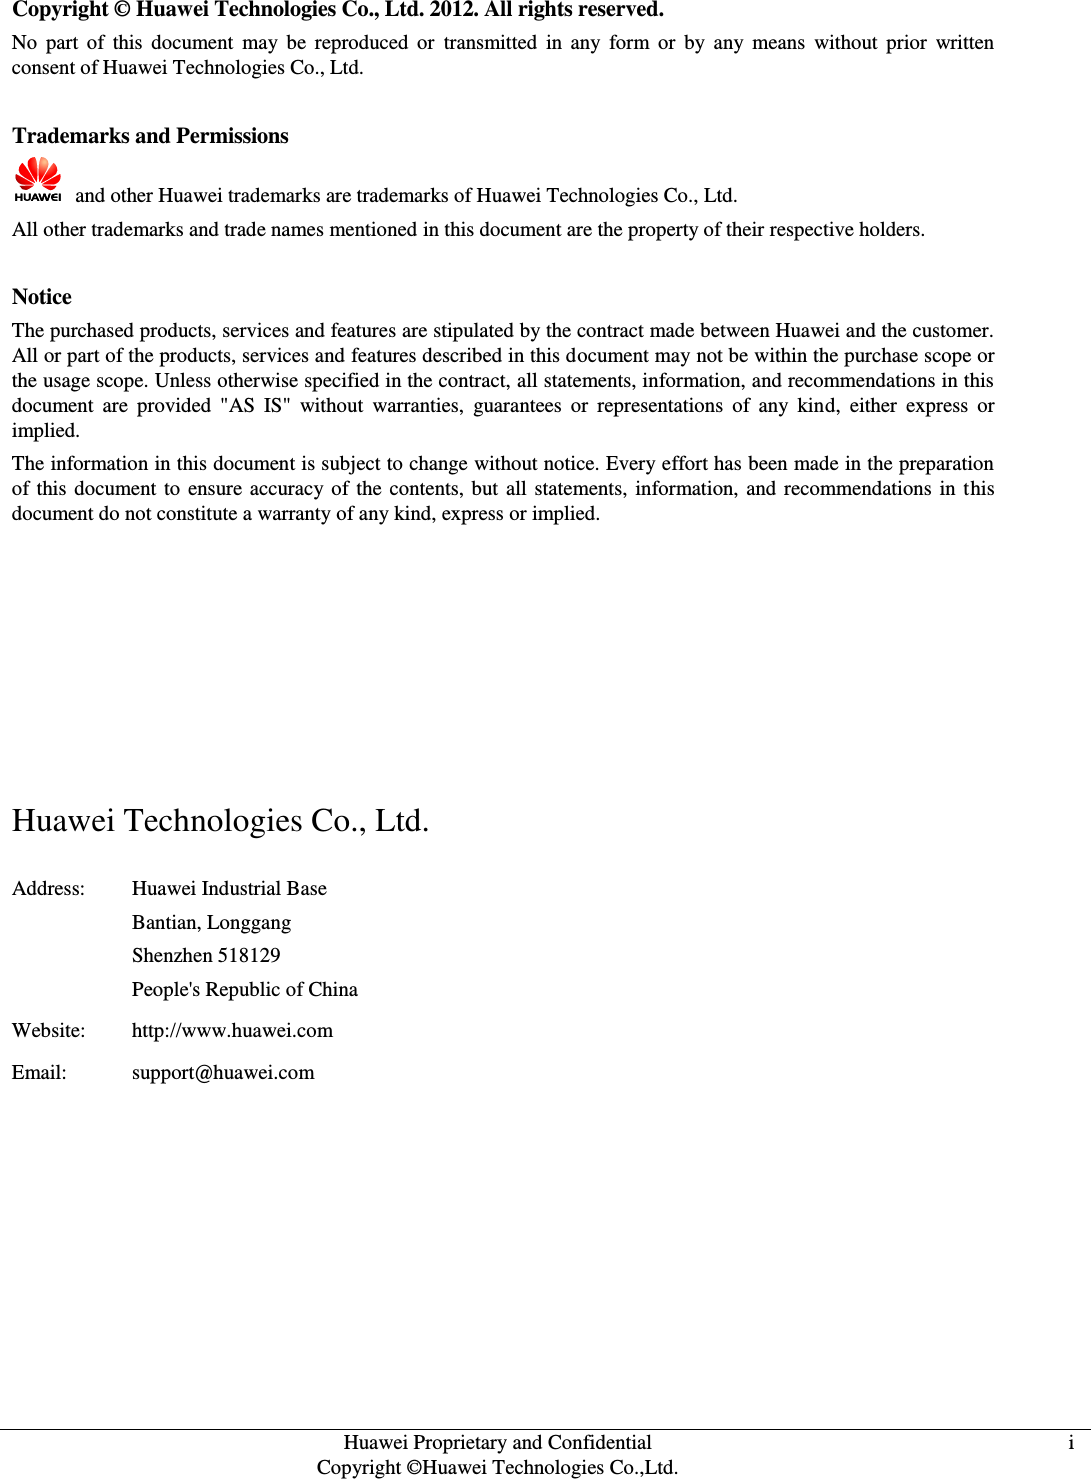   Huawei Proprietary and Confidential Copyright ©Huawei Technologies Co.,Ltd. i »ªÎª×¨ÓÐºÍ±£ÃÜÐÅÏ¢ i   Copyright © Huawei Technologies Co., Ltd. 2012. All rights reserved. No  part  of  this  document  may  be  reproduced  or  transmitted  in  any  form  or  by  any  means  without prior  written consent of Huawei Technologies Co., Ltd.  Trademarks and Permissions   and other Huawei trademarks are trademarks of Huawei Technologies Co., Ltd. All other trademarks and trade names mentioned in this document are the property of their respective holders.  Notice The purchased products, services and features are stipulated by the contract made between Huawei and the customer. All or part of the products, services and features described in this document may not be within the purchase scope or the usage scope. Unless otherwise specified in the contract, all statements, information, and recommendations in this document  are  provided  &quot;AS  IS&quot;  without  warranties,  guarantees  or  representations  of  any  kind,  either  express  or implied. The information in this document is subject to change without notice. Every effort has been made in the preparation of this document to ensure accuracy of the contents, but all statements, information, and recommendations in this document do not constitute a warranty of any kind, express or implied.       Huawei Technologies Co., Ltd. Address: Huawei Industrial Base Bantian, Longgang Shenzhen 518129 People&apos;s Republic of China Website: http://www.huawei.com Email: support@huawei.com   